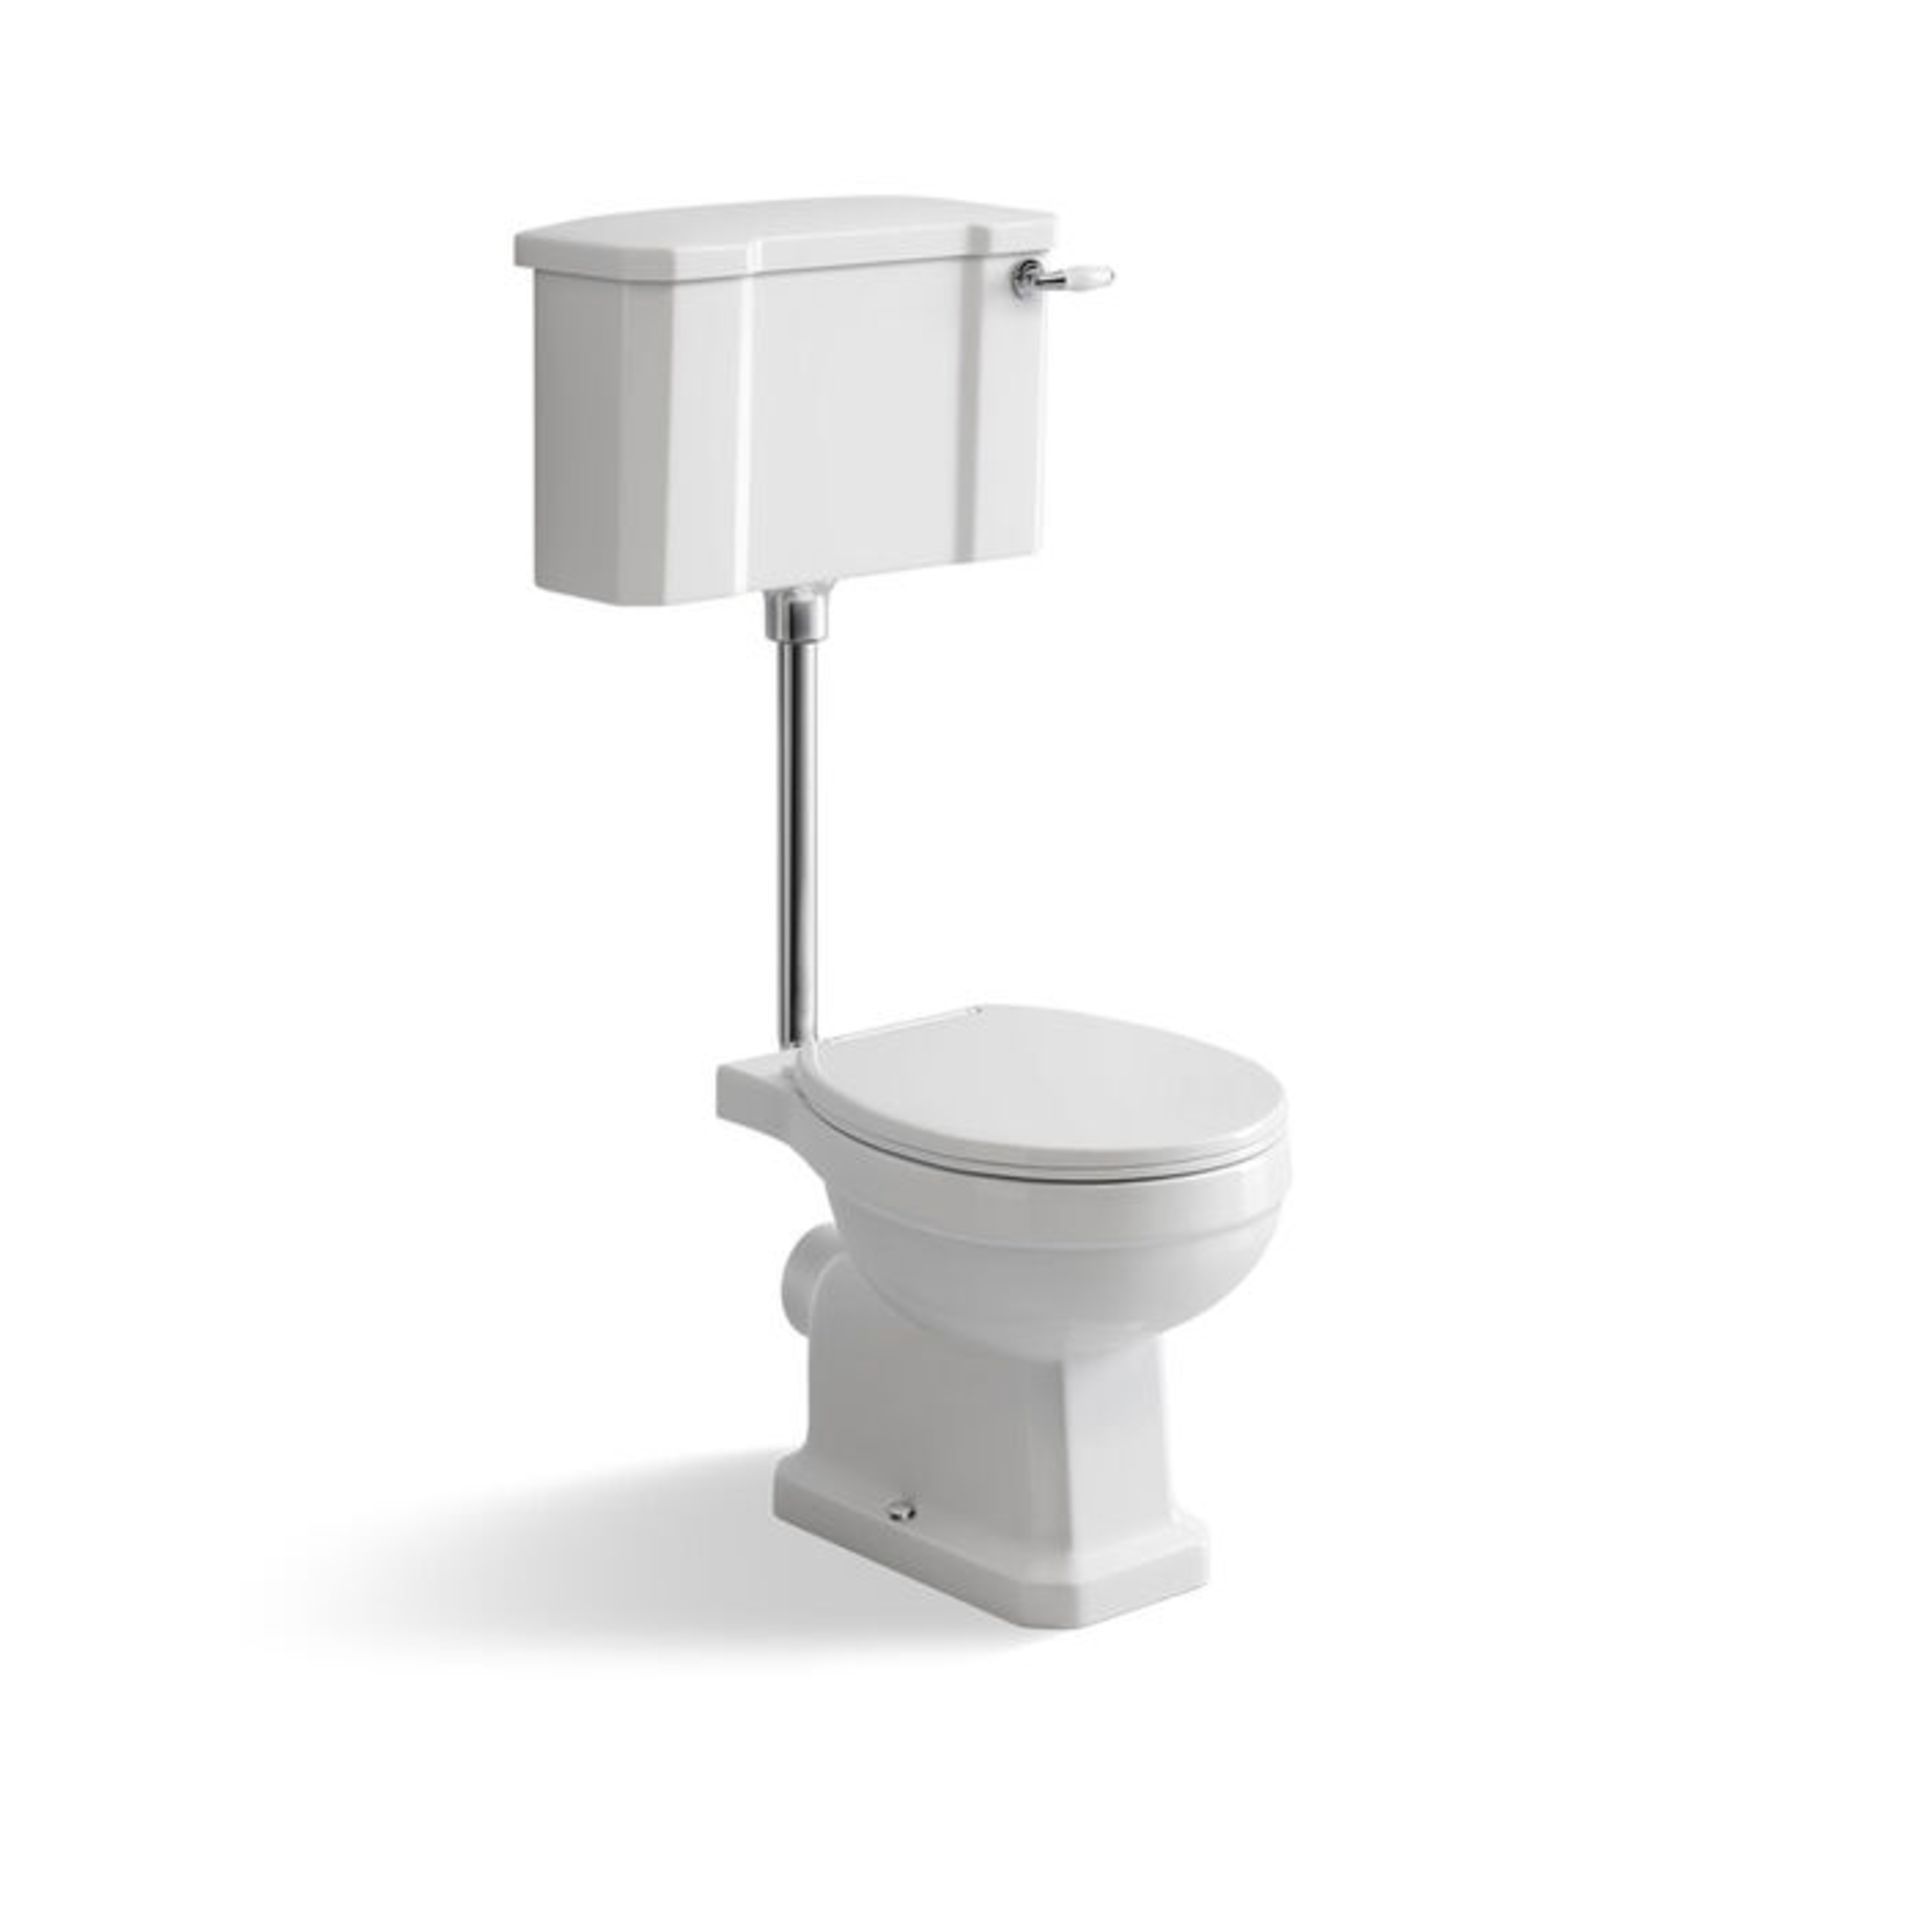 NEW & BOXED Tradiational Cambridge Low-Level Cistern Toilet- With Luxury Soft Close Seat. CCG6... - Image 3 of 3